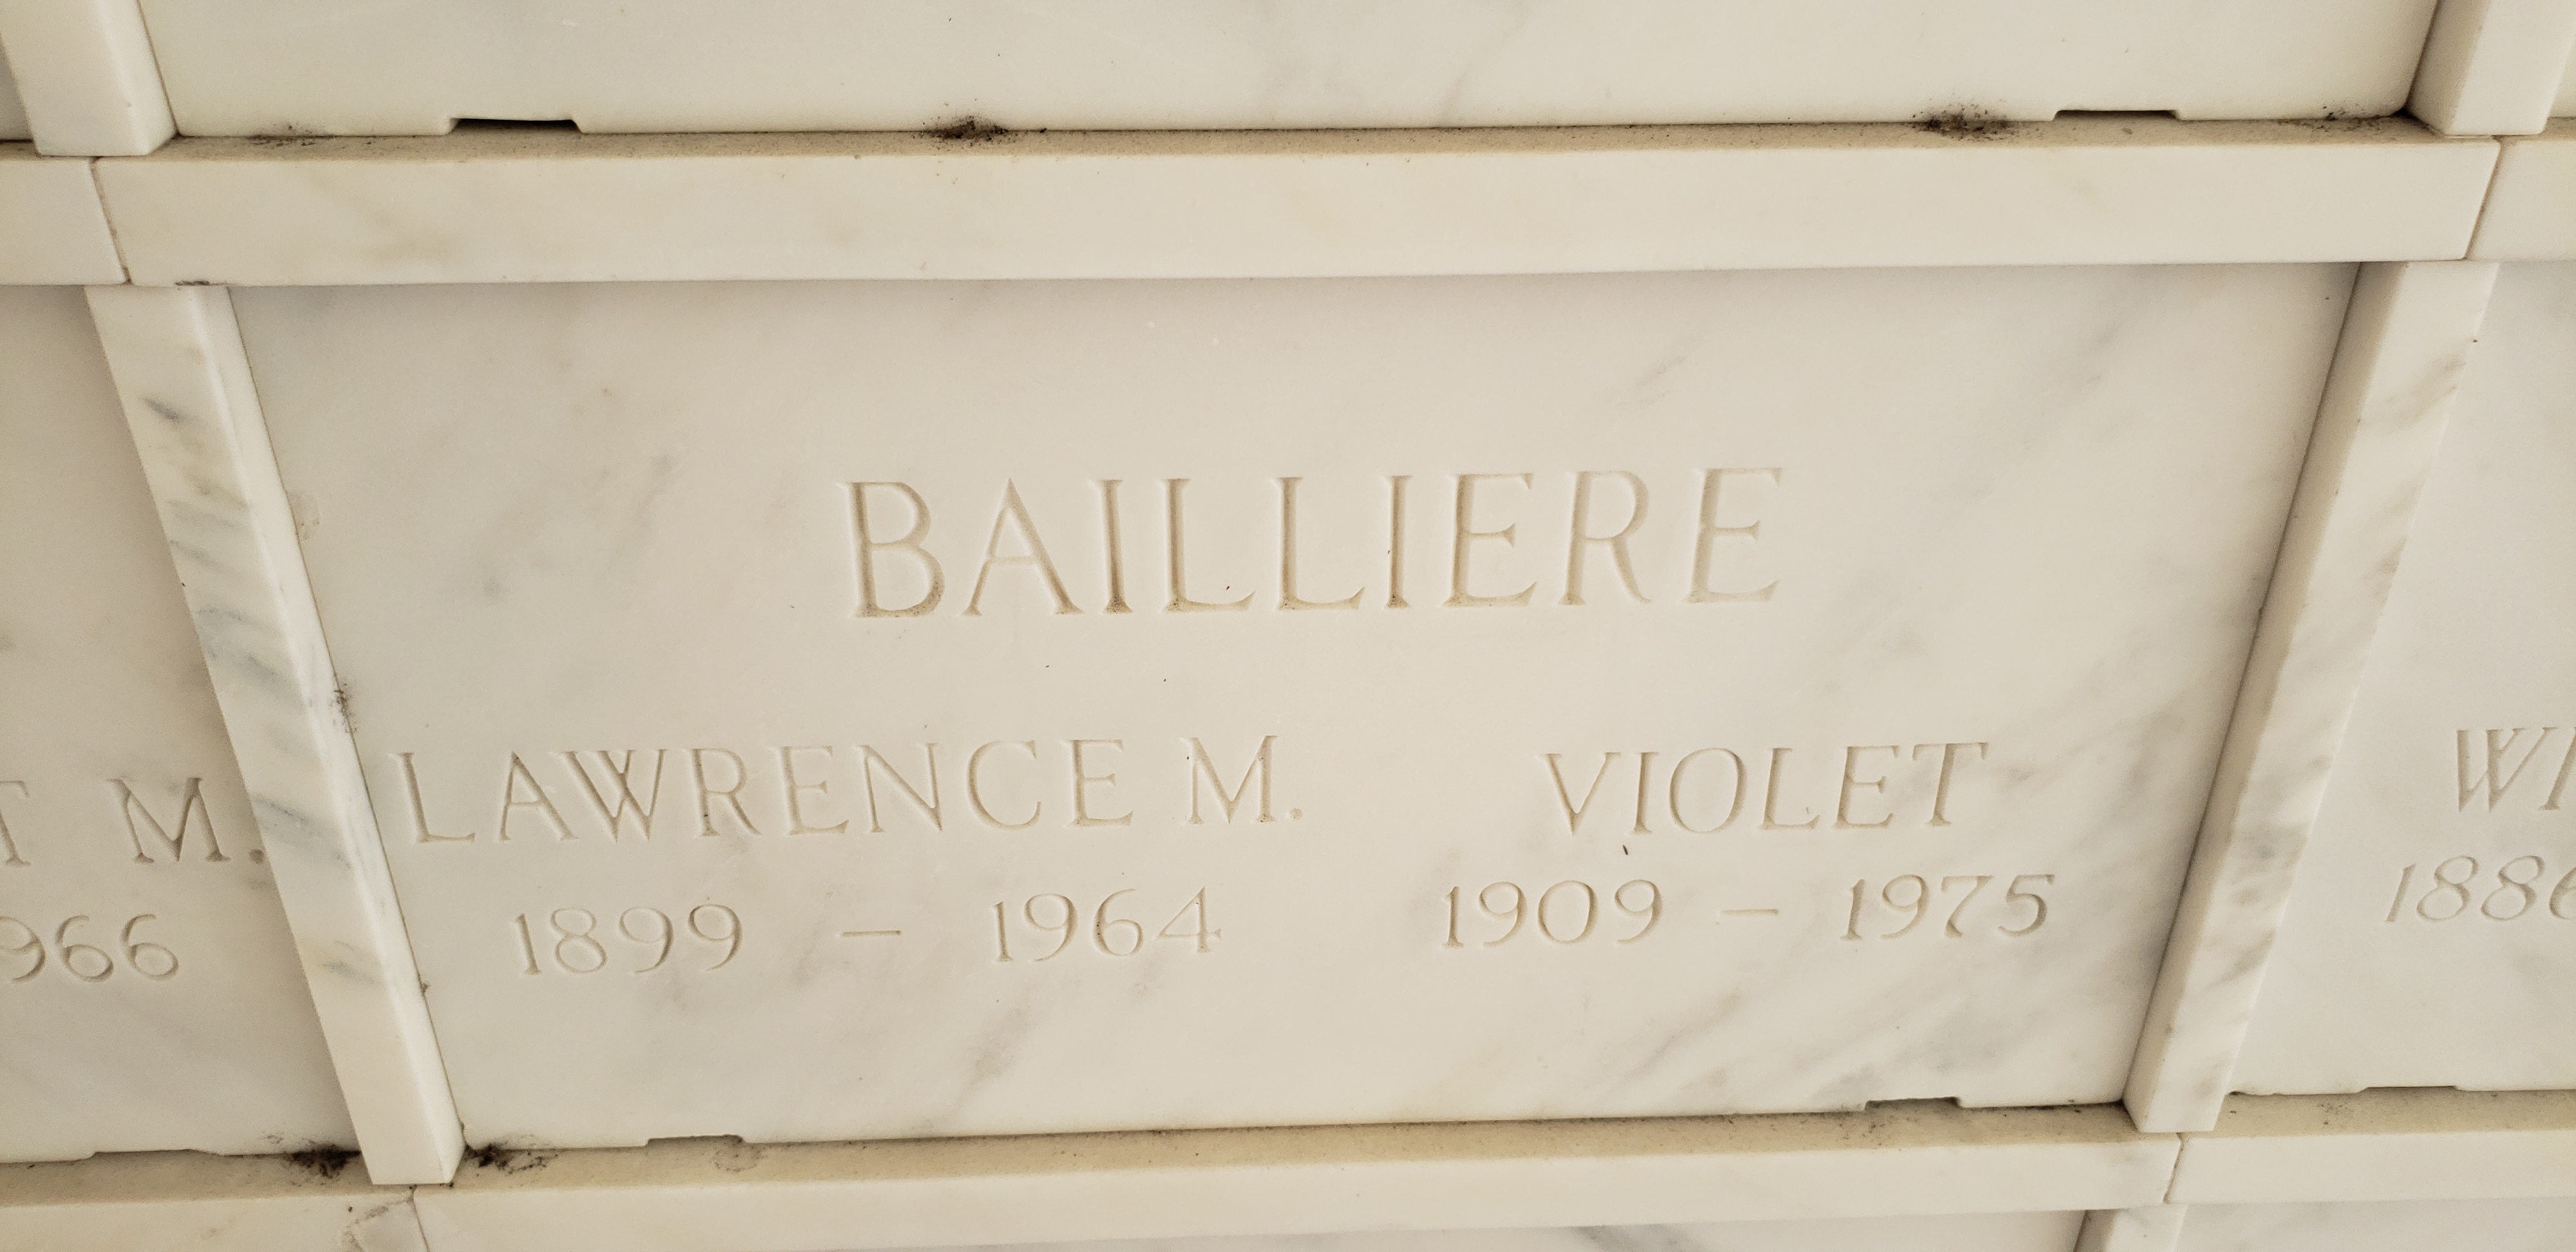 Lawrence M Bailliere